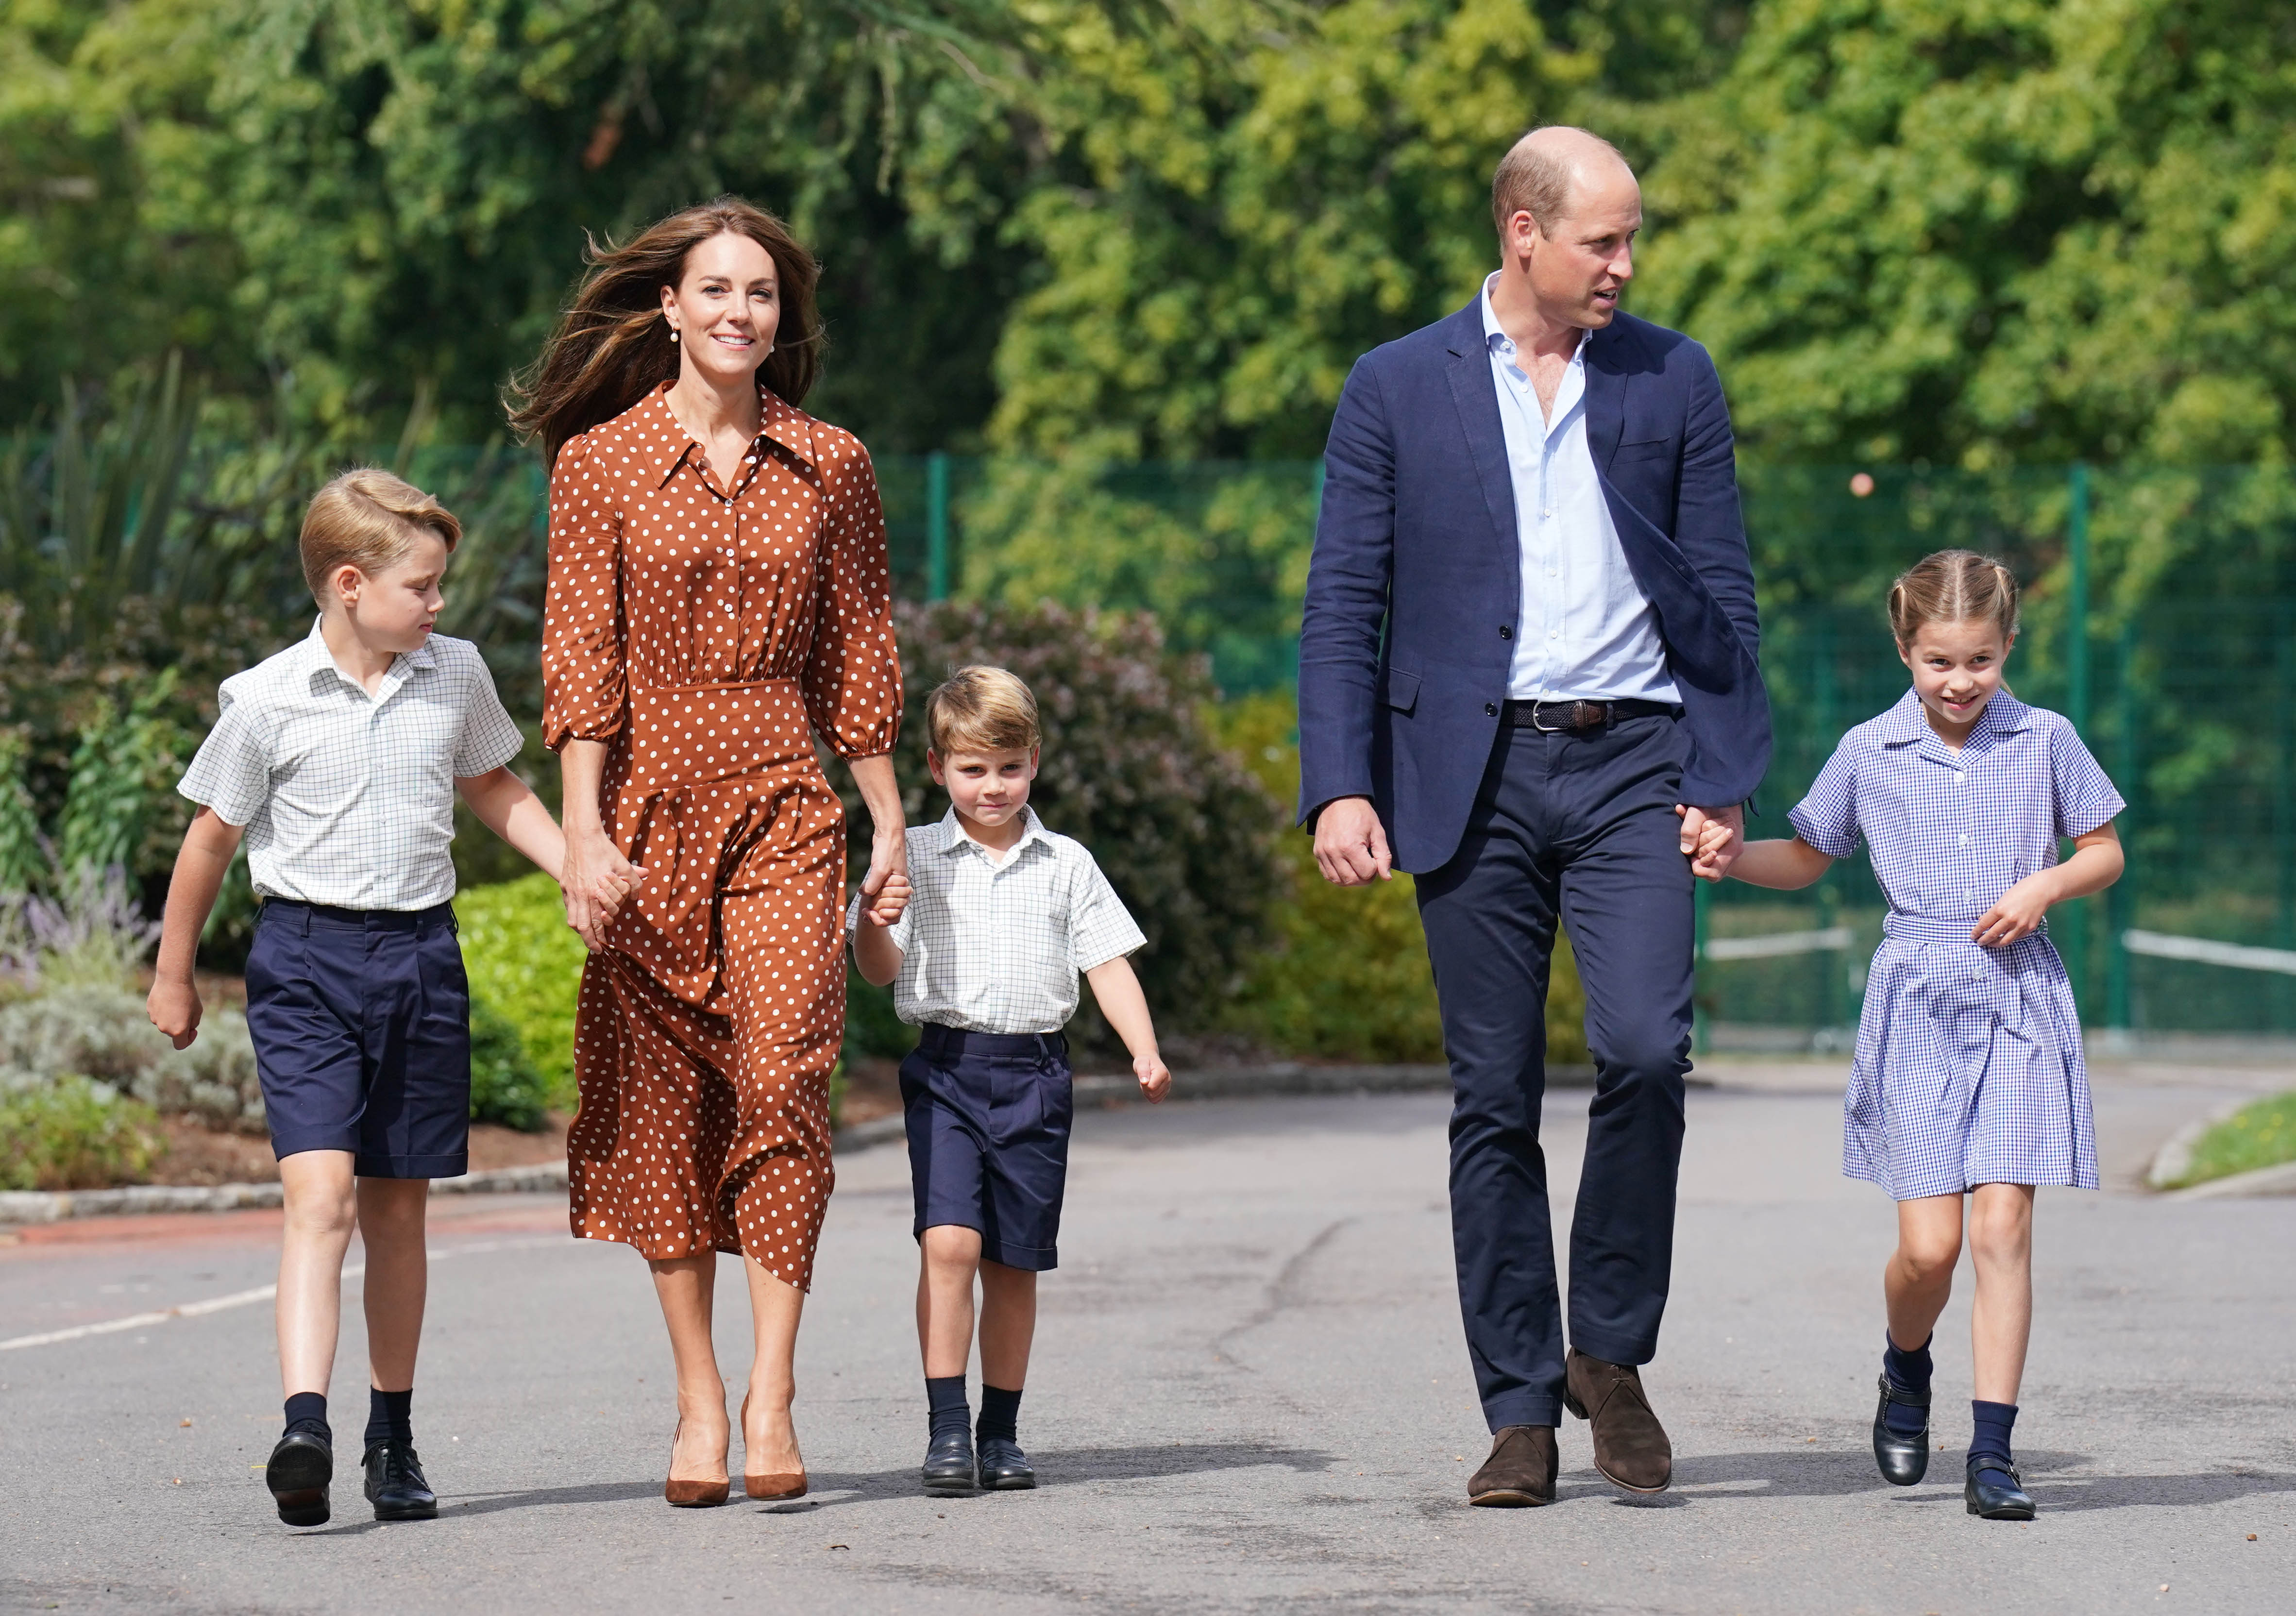 Prince George, Kate Middleton, Prince Louis, Prince William and Princess Charlotte arriving at Lambrook School in Bracknell, England on September 7, 2022 | Source: Getty Images